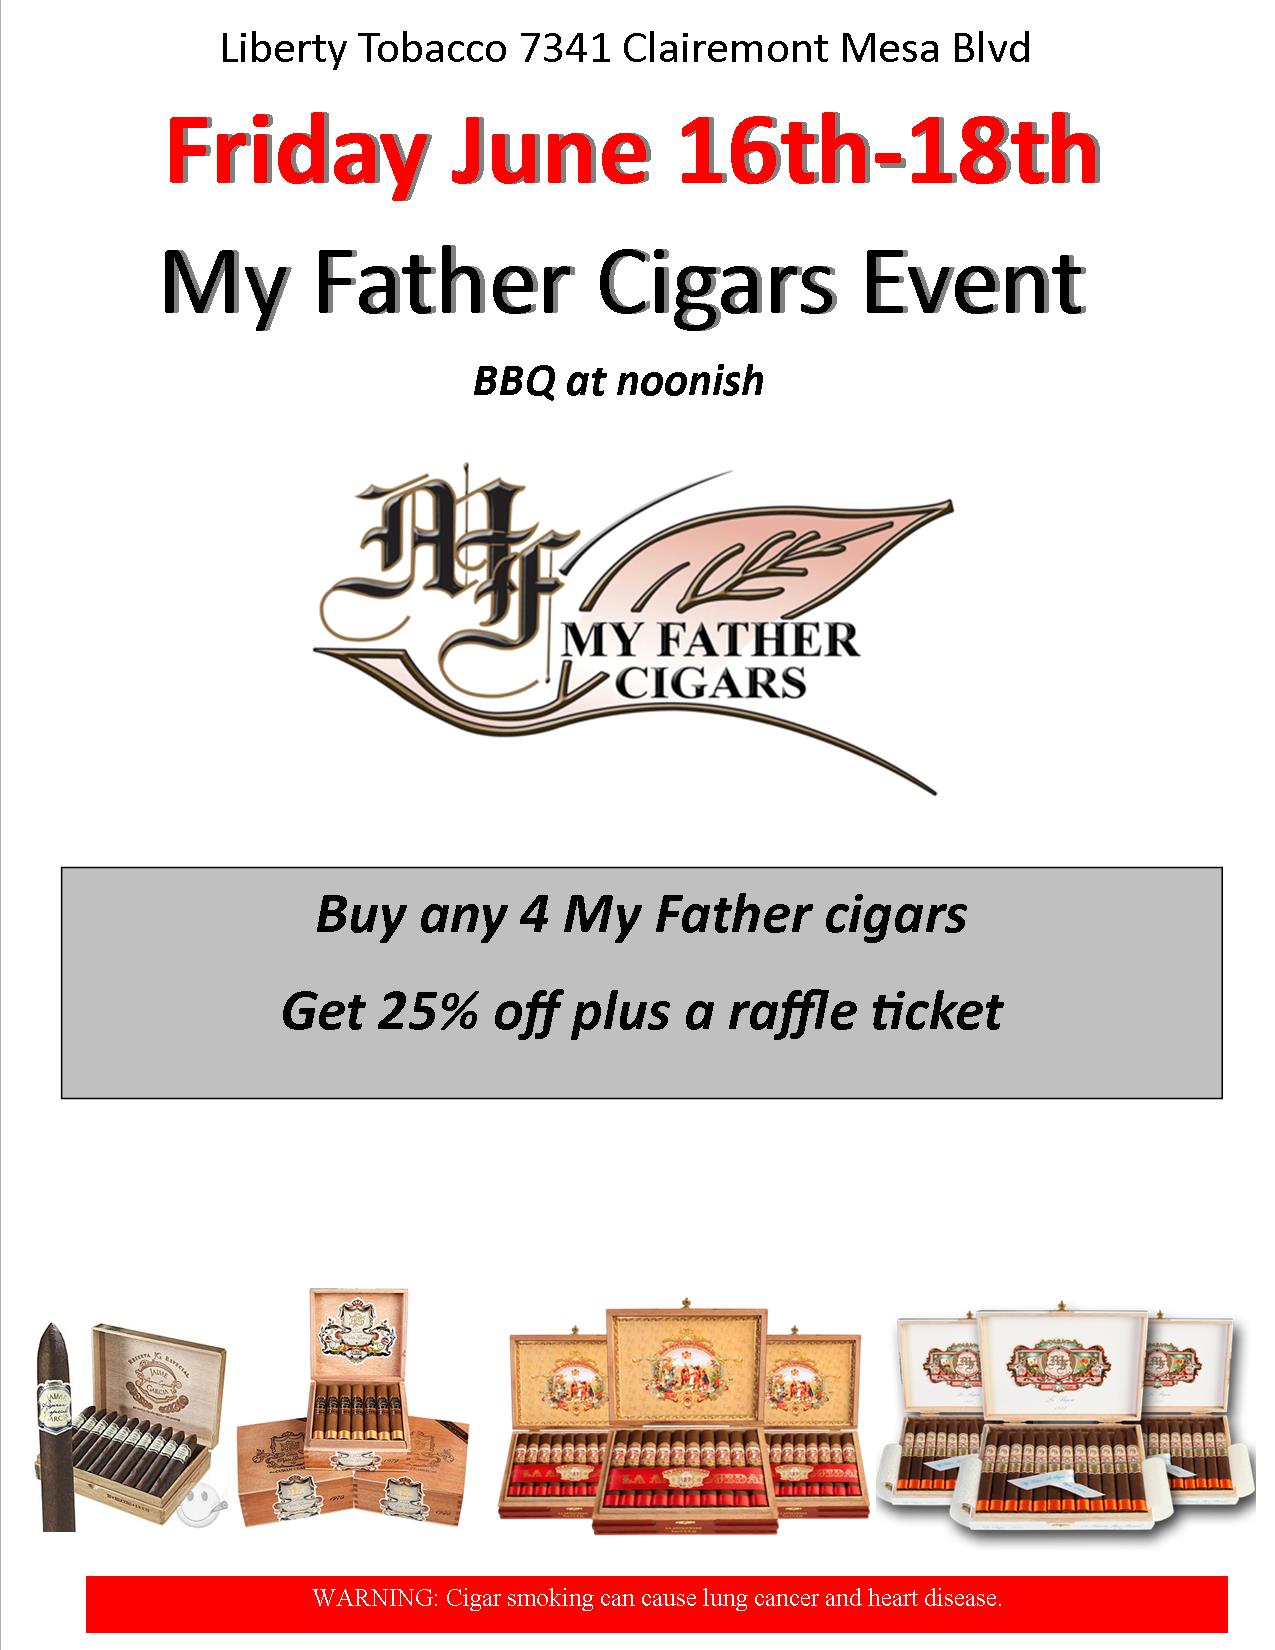 My Father Cigars Event at Liberty Tobacco